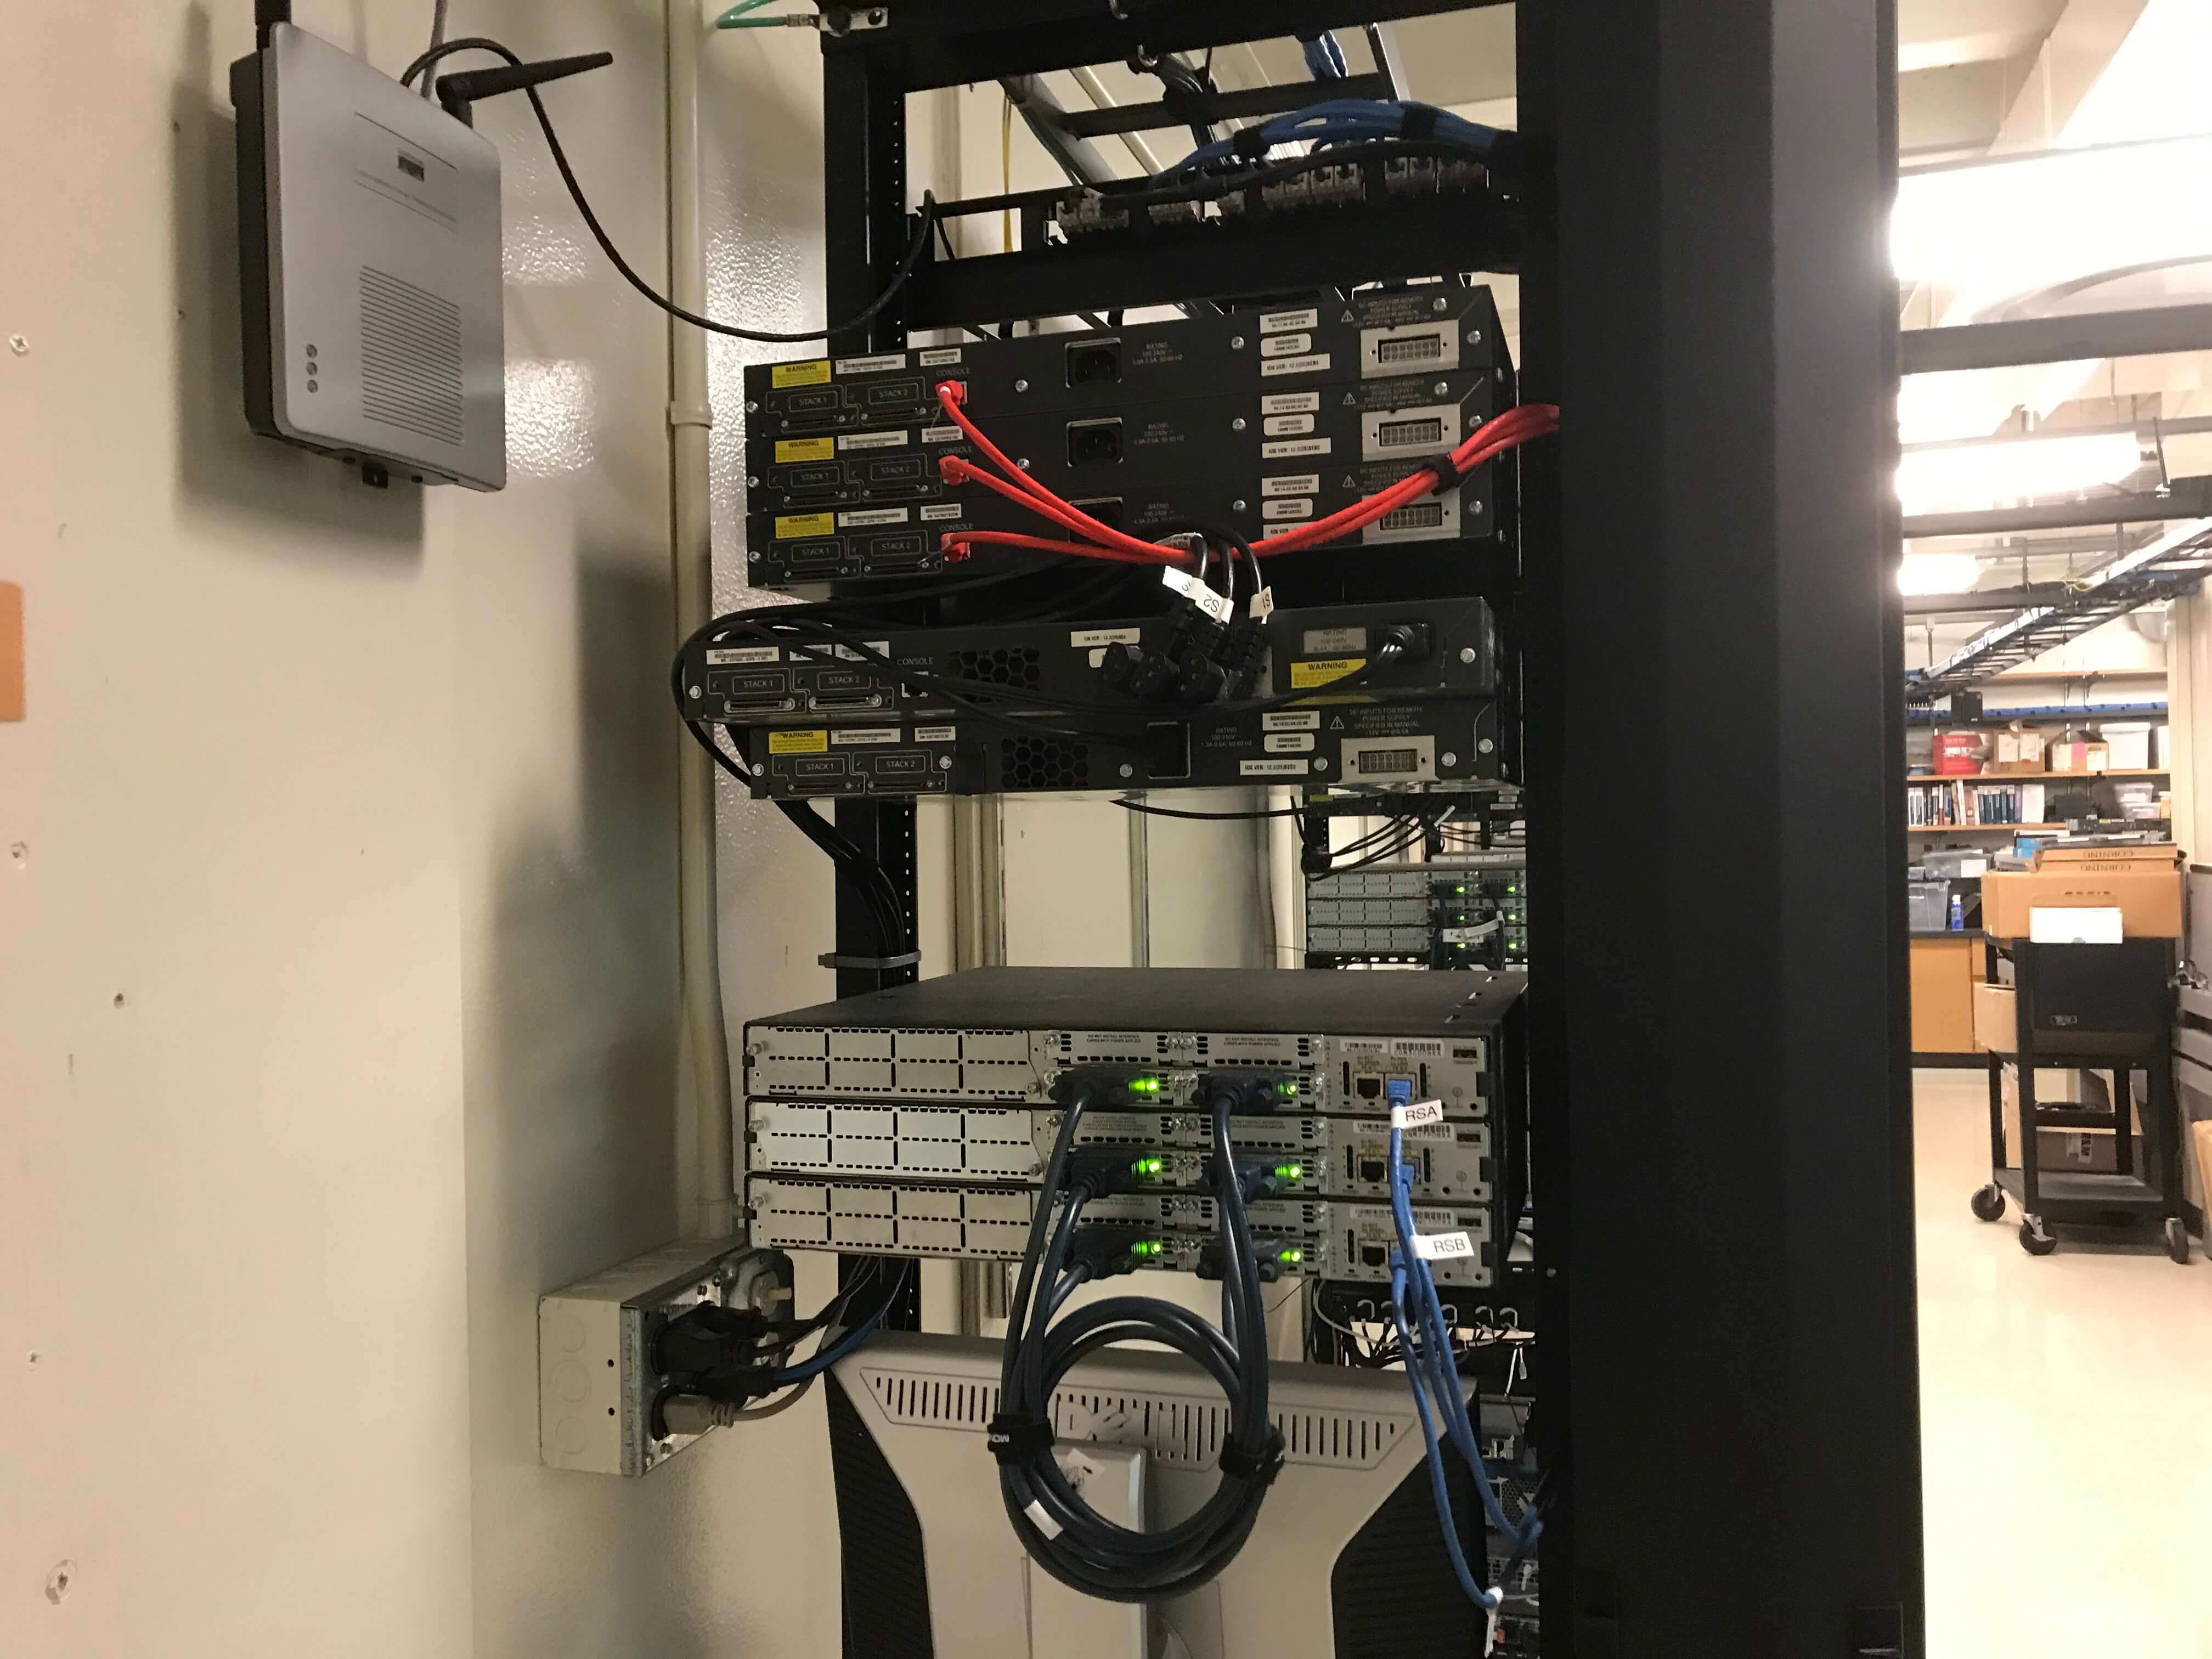 An up-close shot of some of the networking equipment in the lab